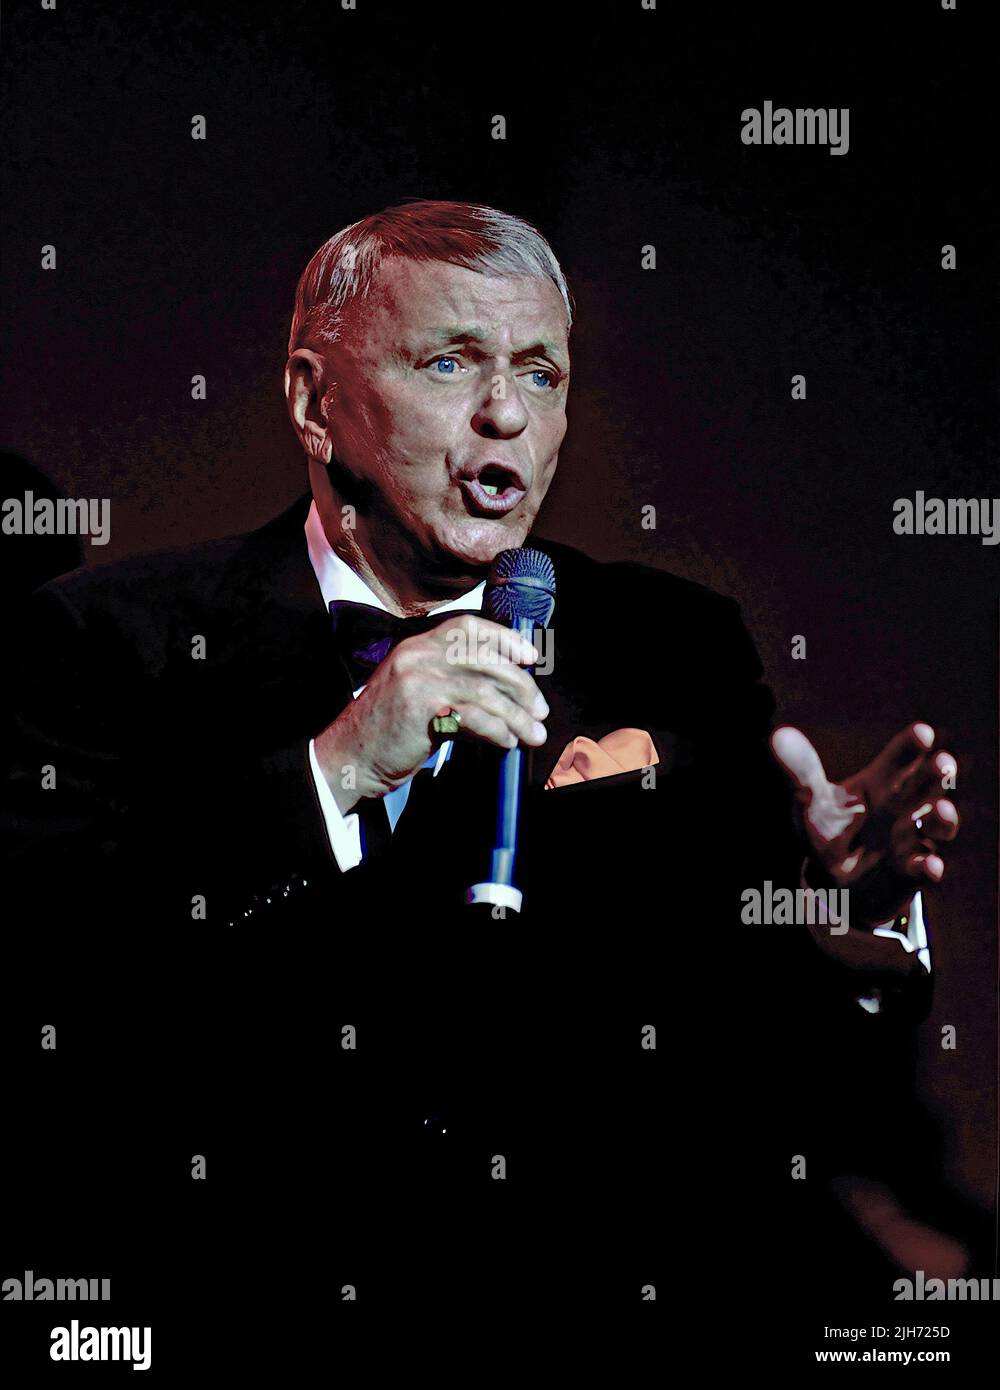 WASHINGTON DC - OCTOBER 1, 1992Frank Sinatra performs at the gala reopening after a seven million restoration of the Warner theatre in Washington DC. This would turn out to be Sinatra's last performance in Washington. Credit: Mark Reinstein / MediaPunch Stock Photo